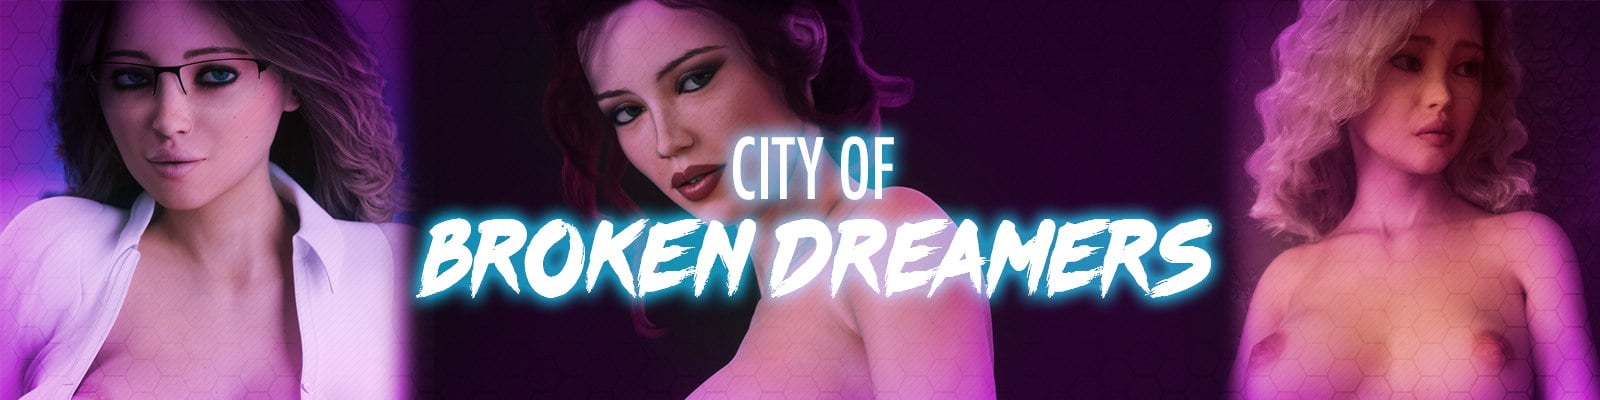 City of Broken Dreamers [PhillyGames] Adult xxx Game Download